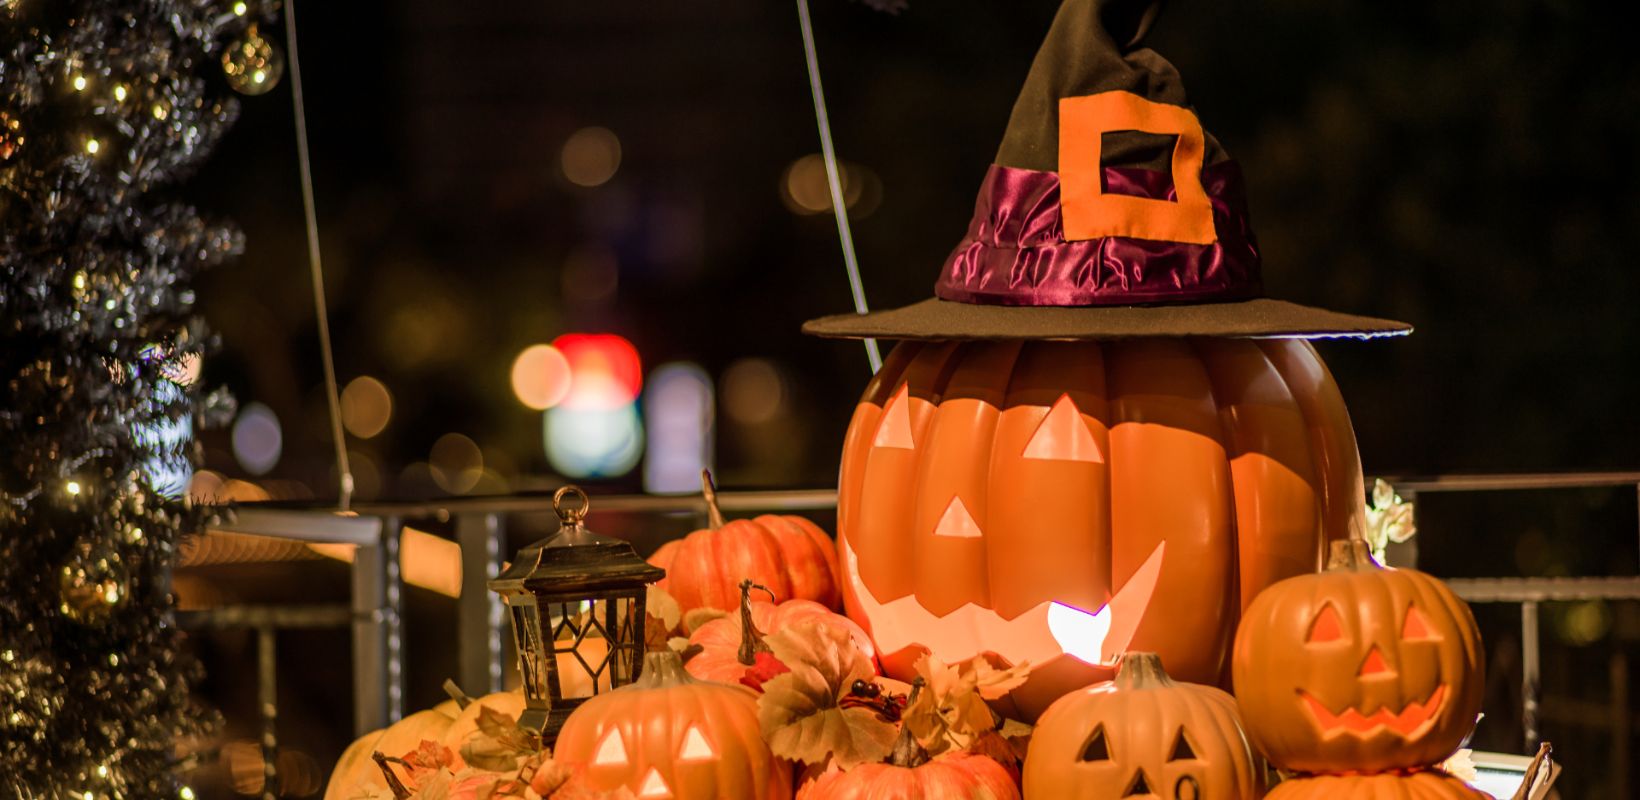 Holiday Landing Pages: 7 Halloween Page Examples For Your Ecommerce Store in 2022